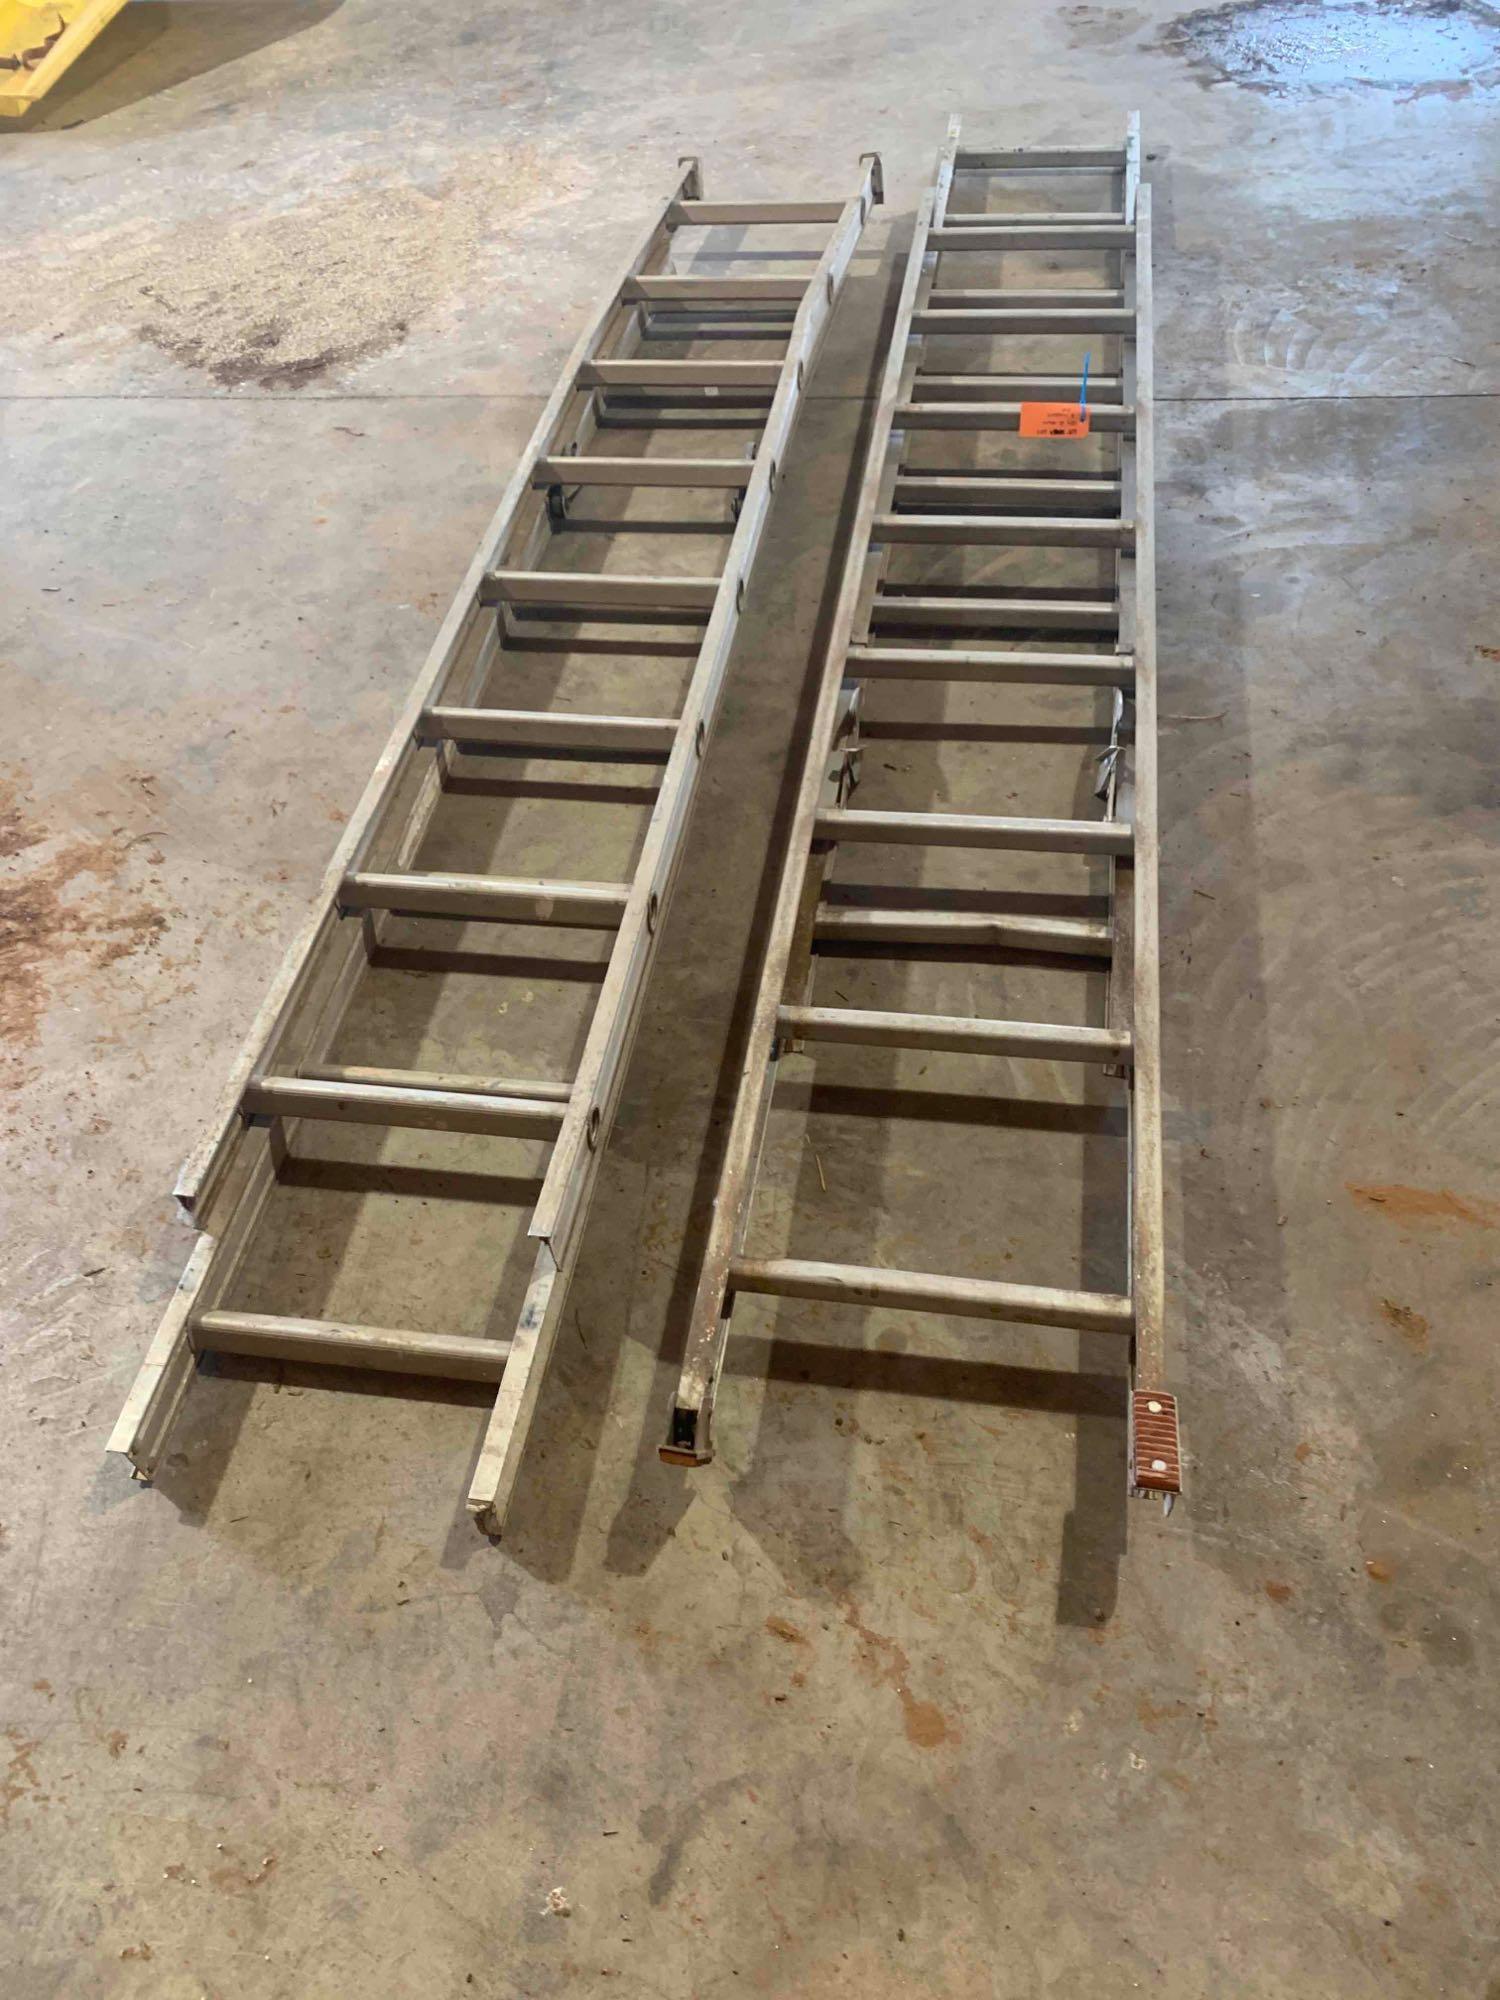 2 ALUM 8’ LADDERS, **SOLD TIMES THE QUANTITY**